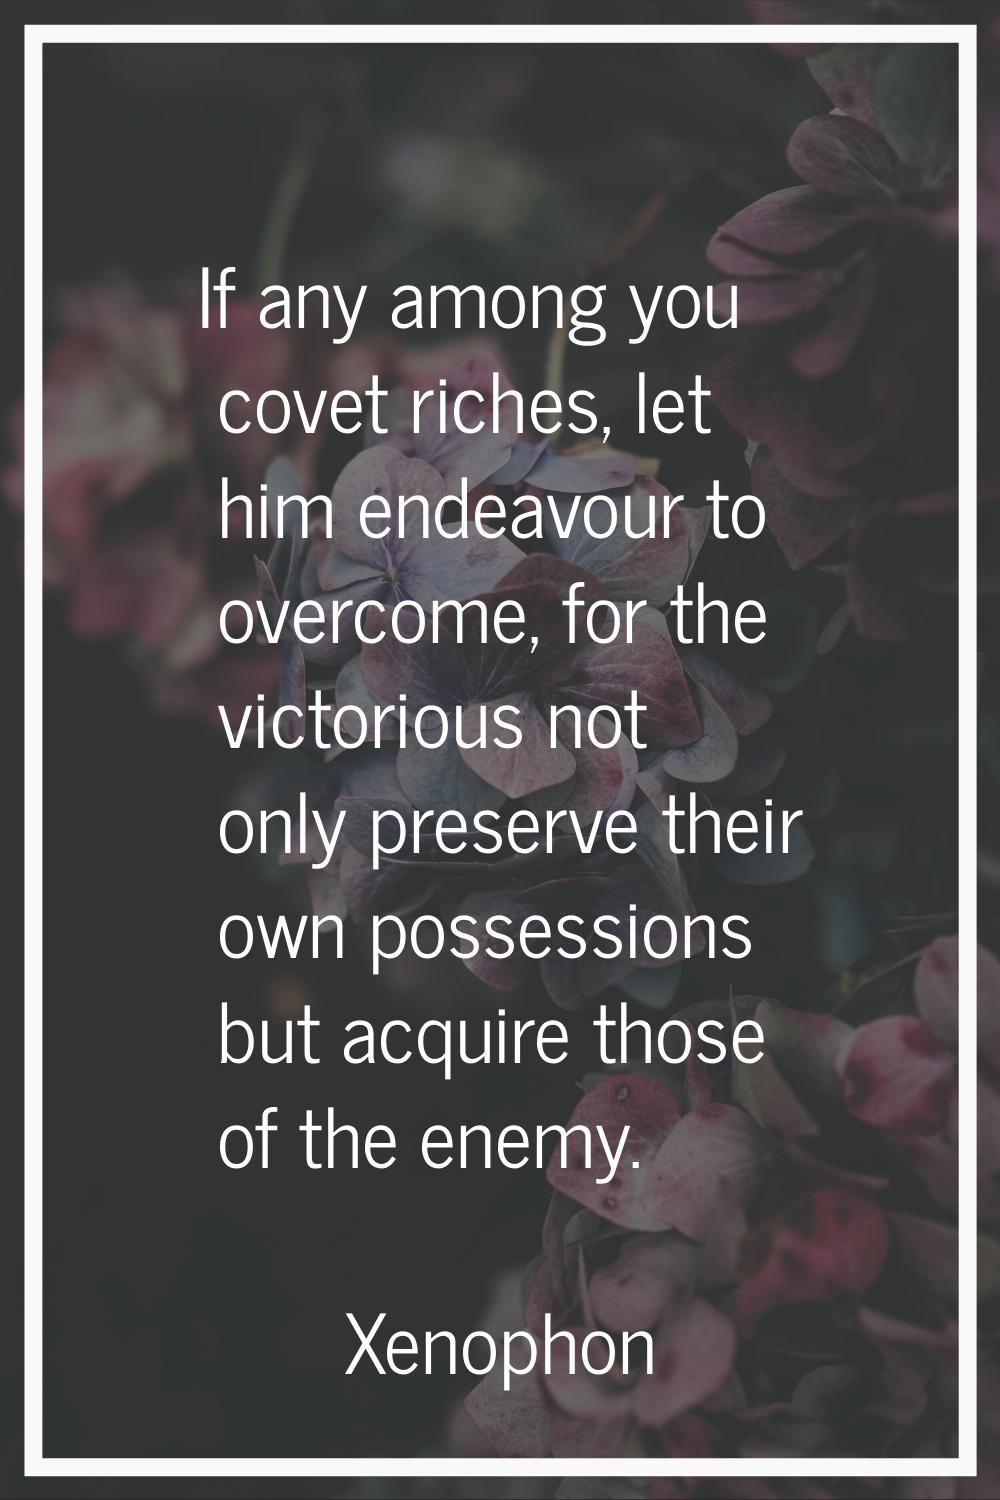 If any among you covet riches, let him endeavour to overcome, for the victorious not only preserve 